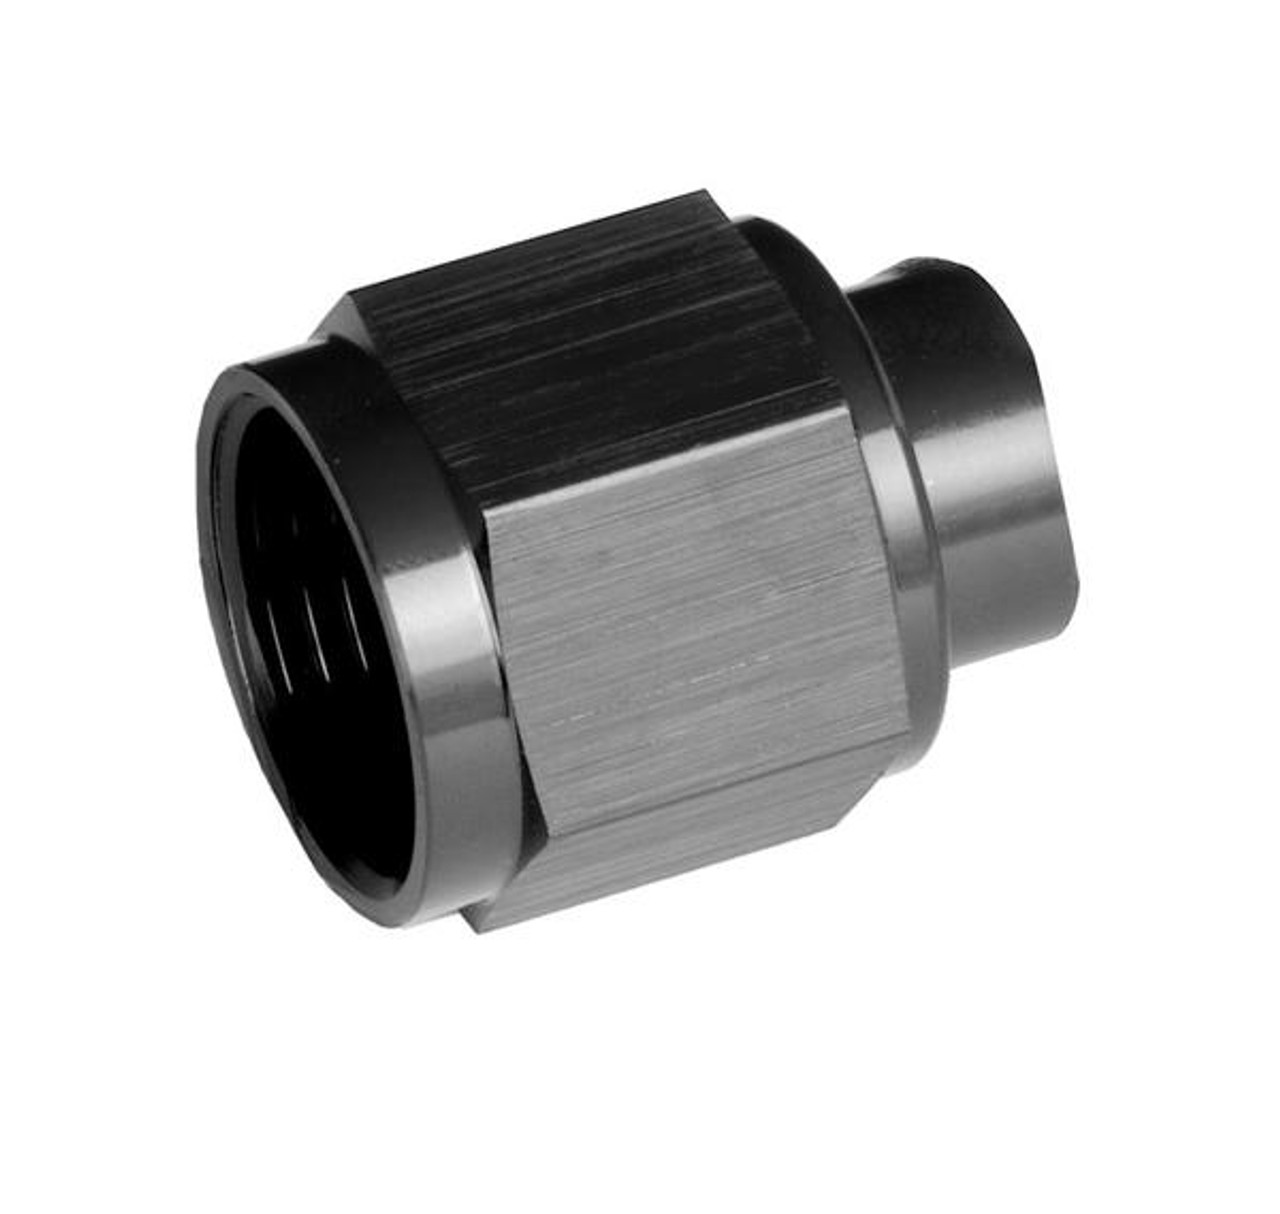 RHP929-08-2, Flare Cap  -08 two piece AN/JIC flare cap nut - black